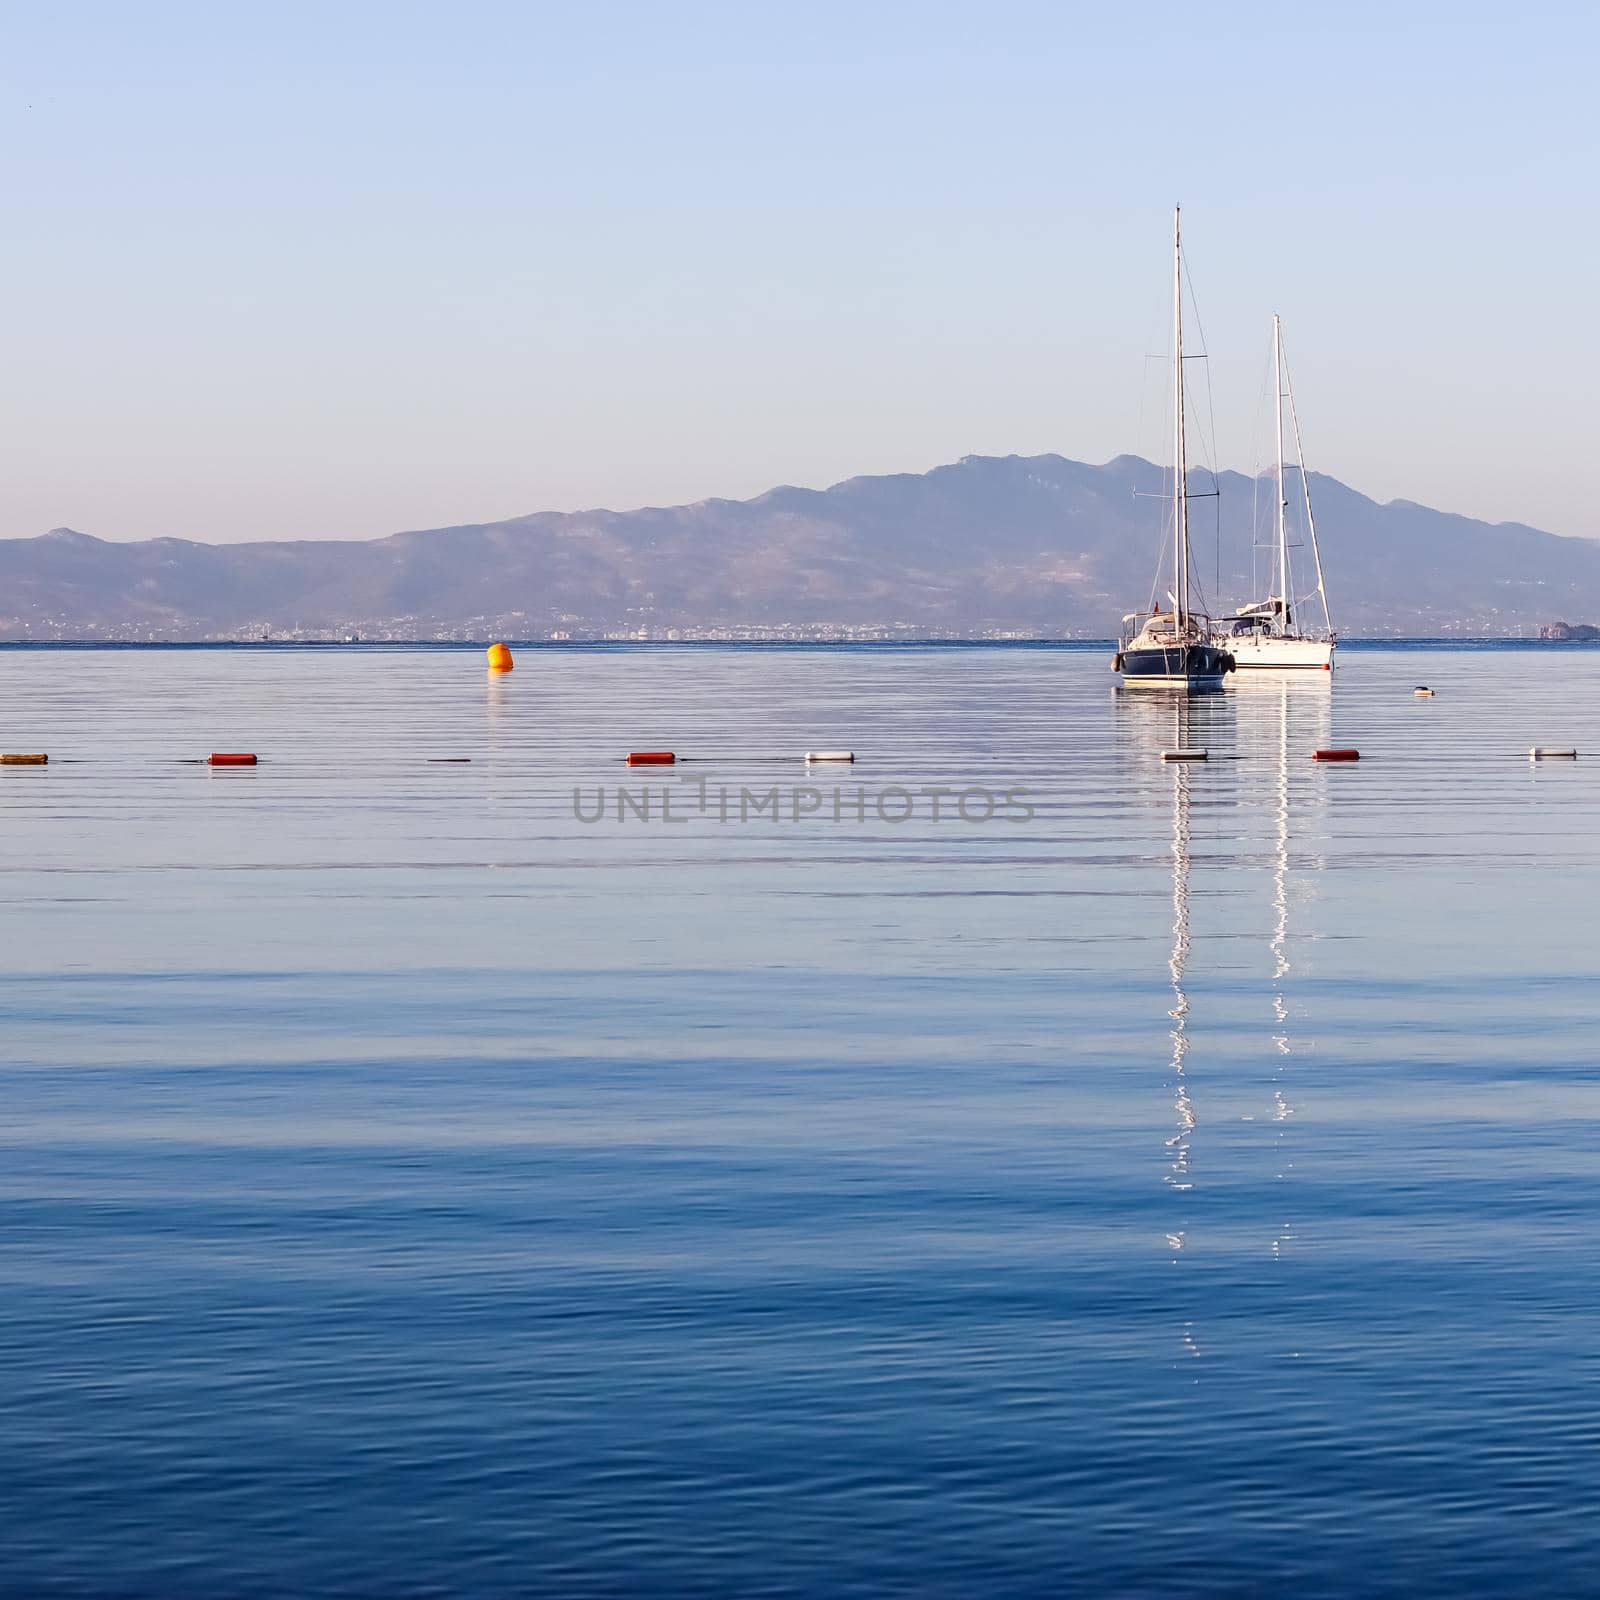 Blue sea, boats, mountains and islands on the Aegean coast. Summer vacation and coastal nature concept